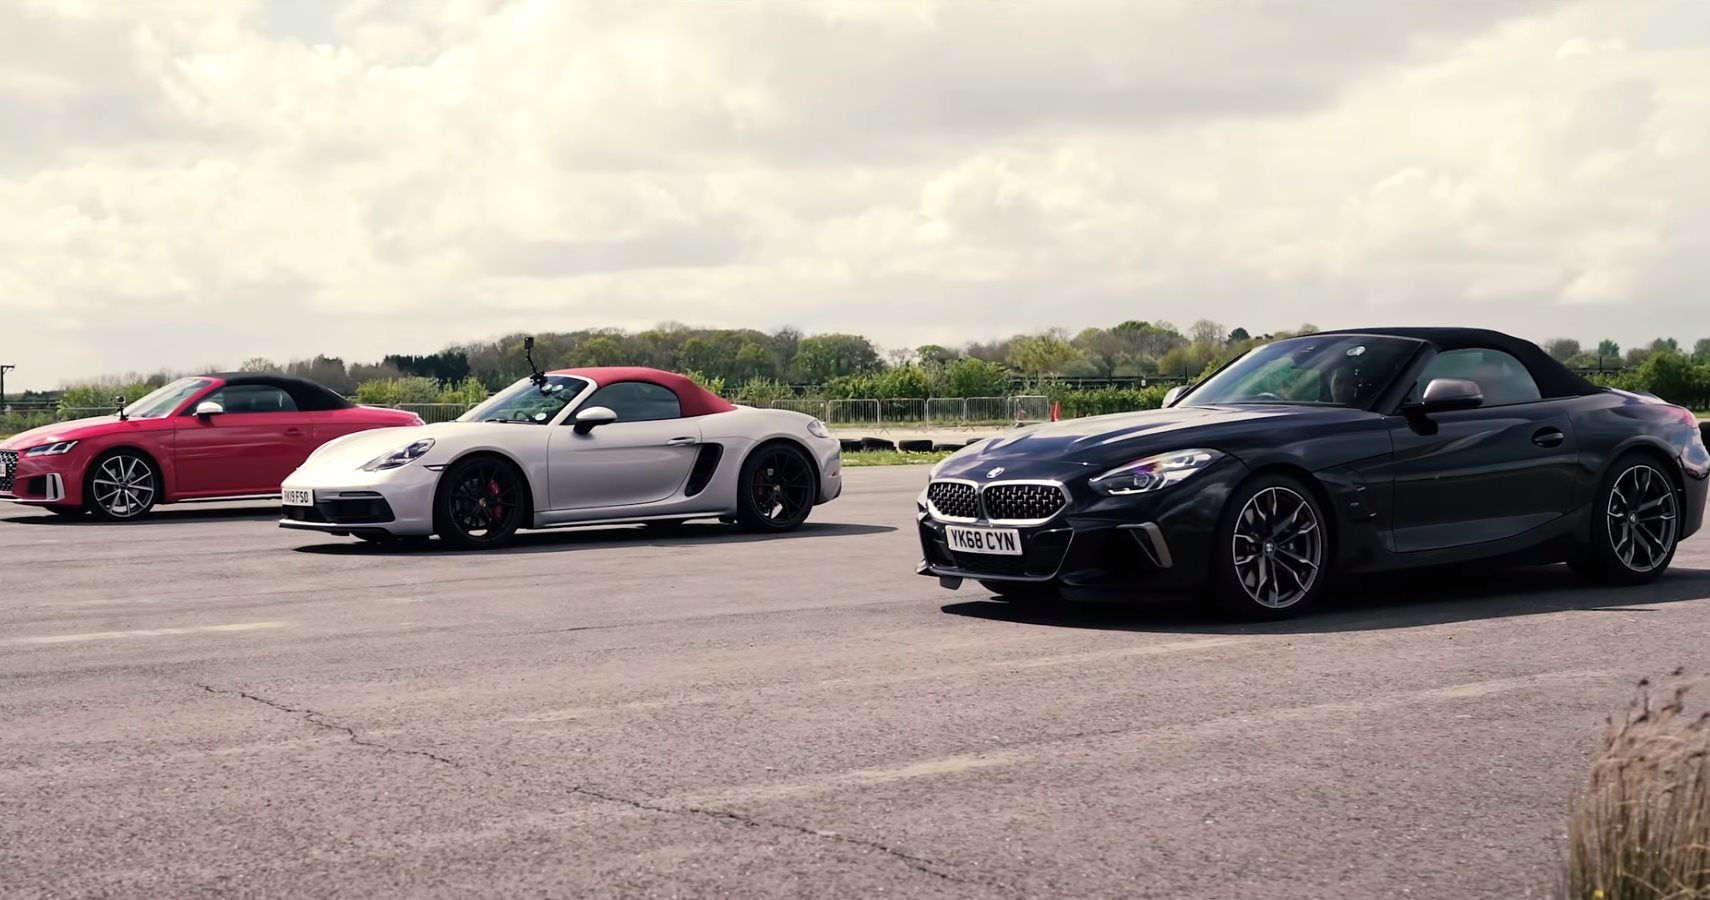 Watch New BMW Z4 Take On Porsche Boxster GTS And Audi TTS In Quarter-Mile Drag Race